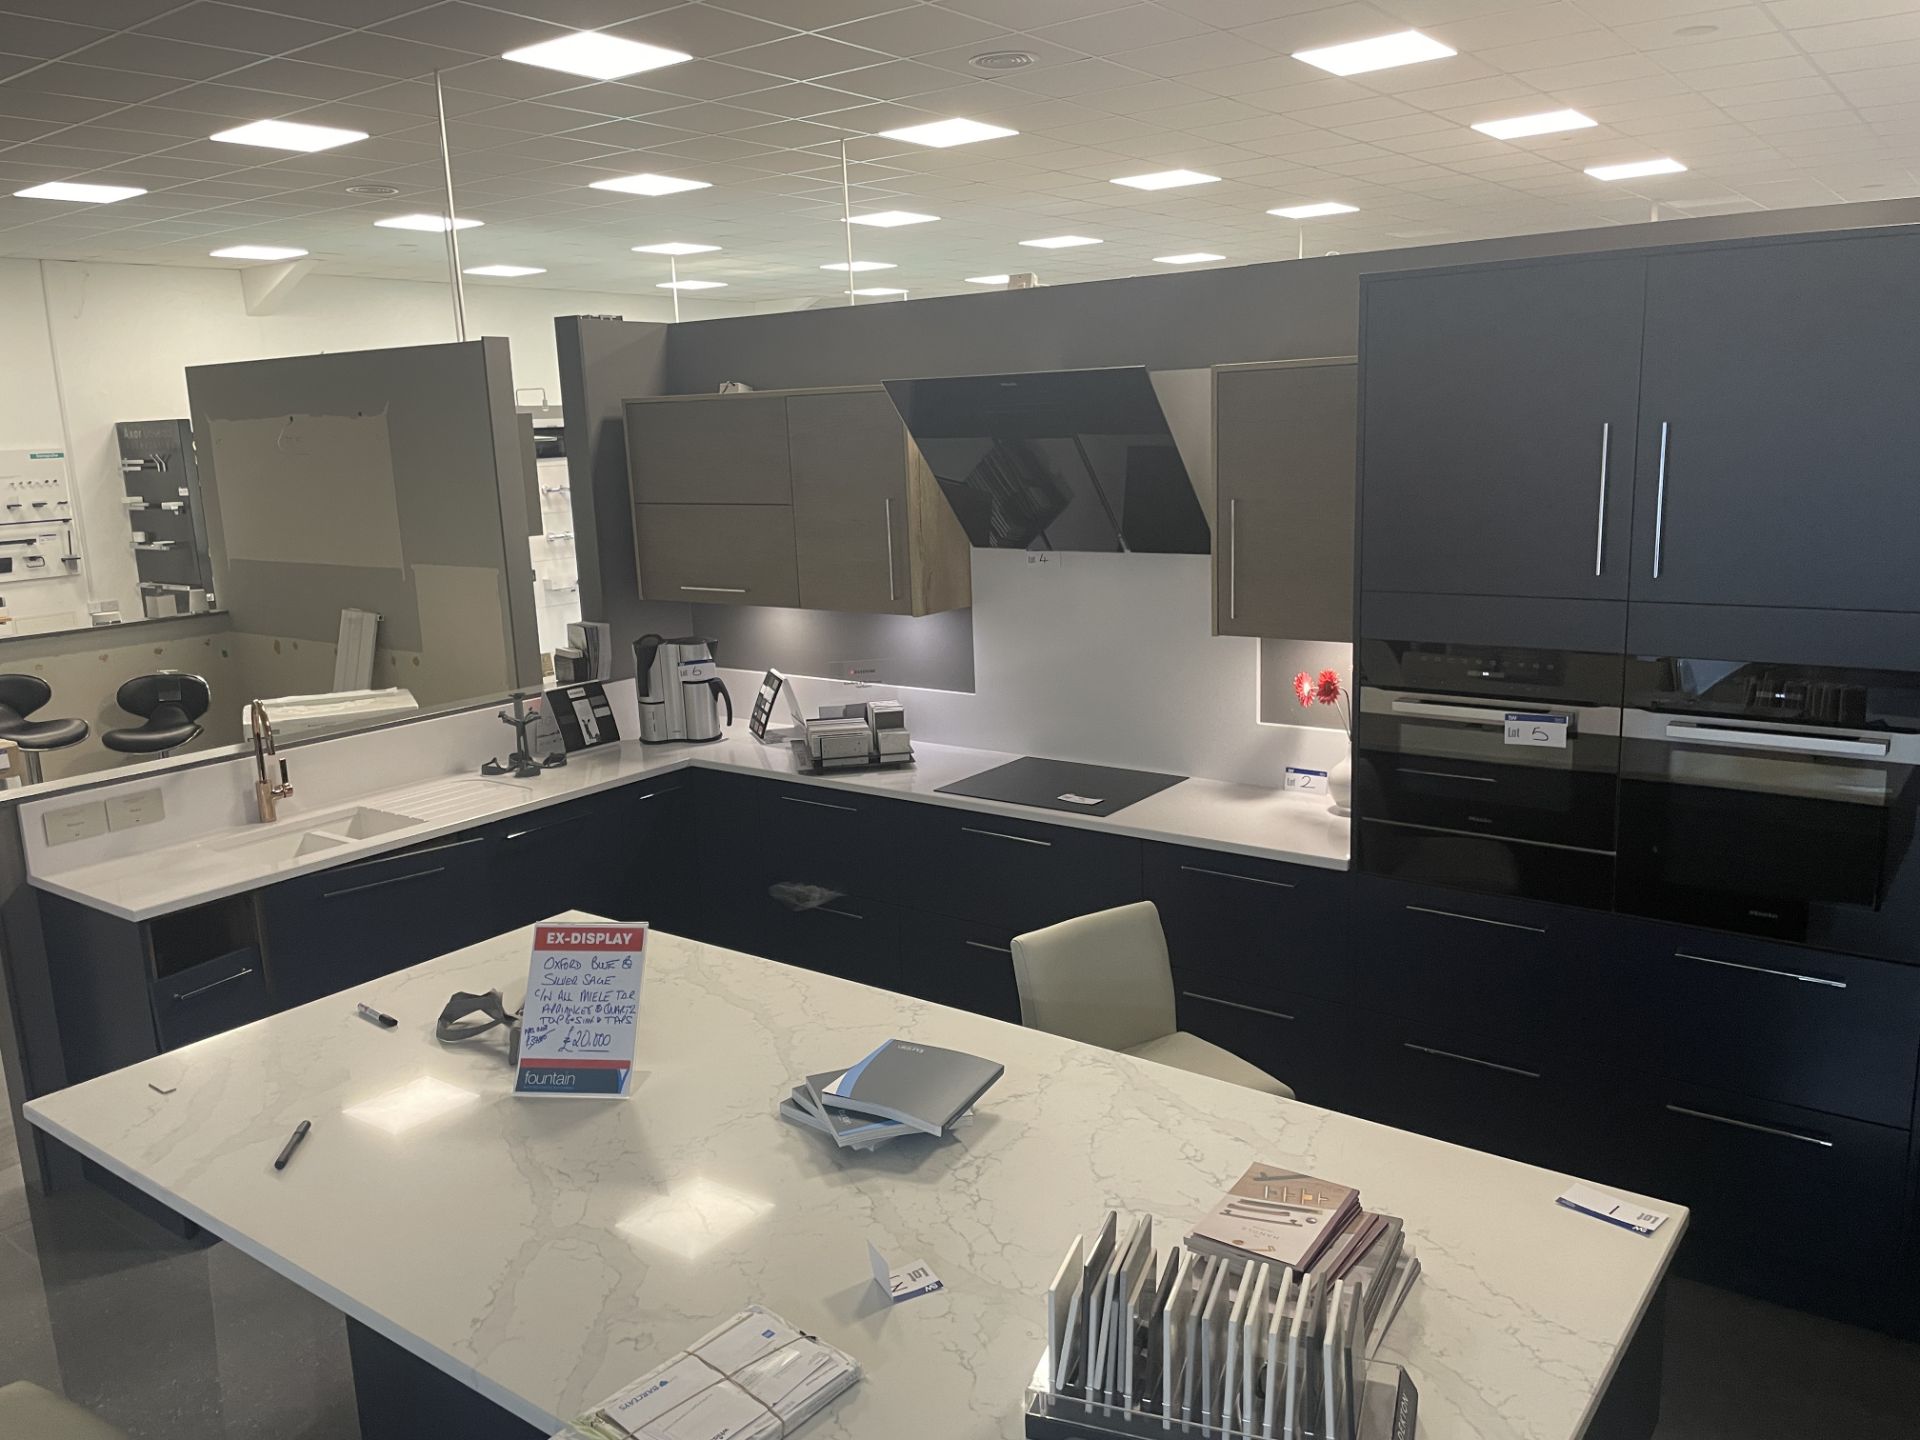 Masterclass Kitchens Hampton/ Madoc OXFORD BLUE & SILVER SAGE KITCHEN UNITS, overall size approx. - Image 2 of 8